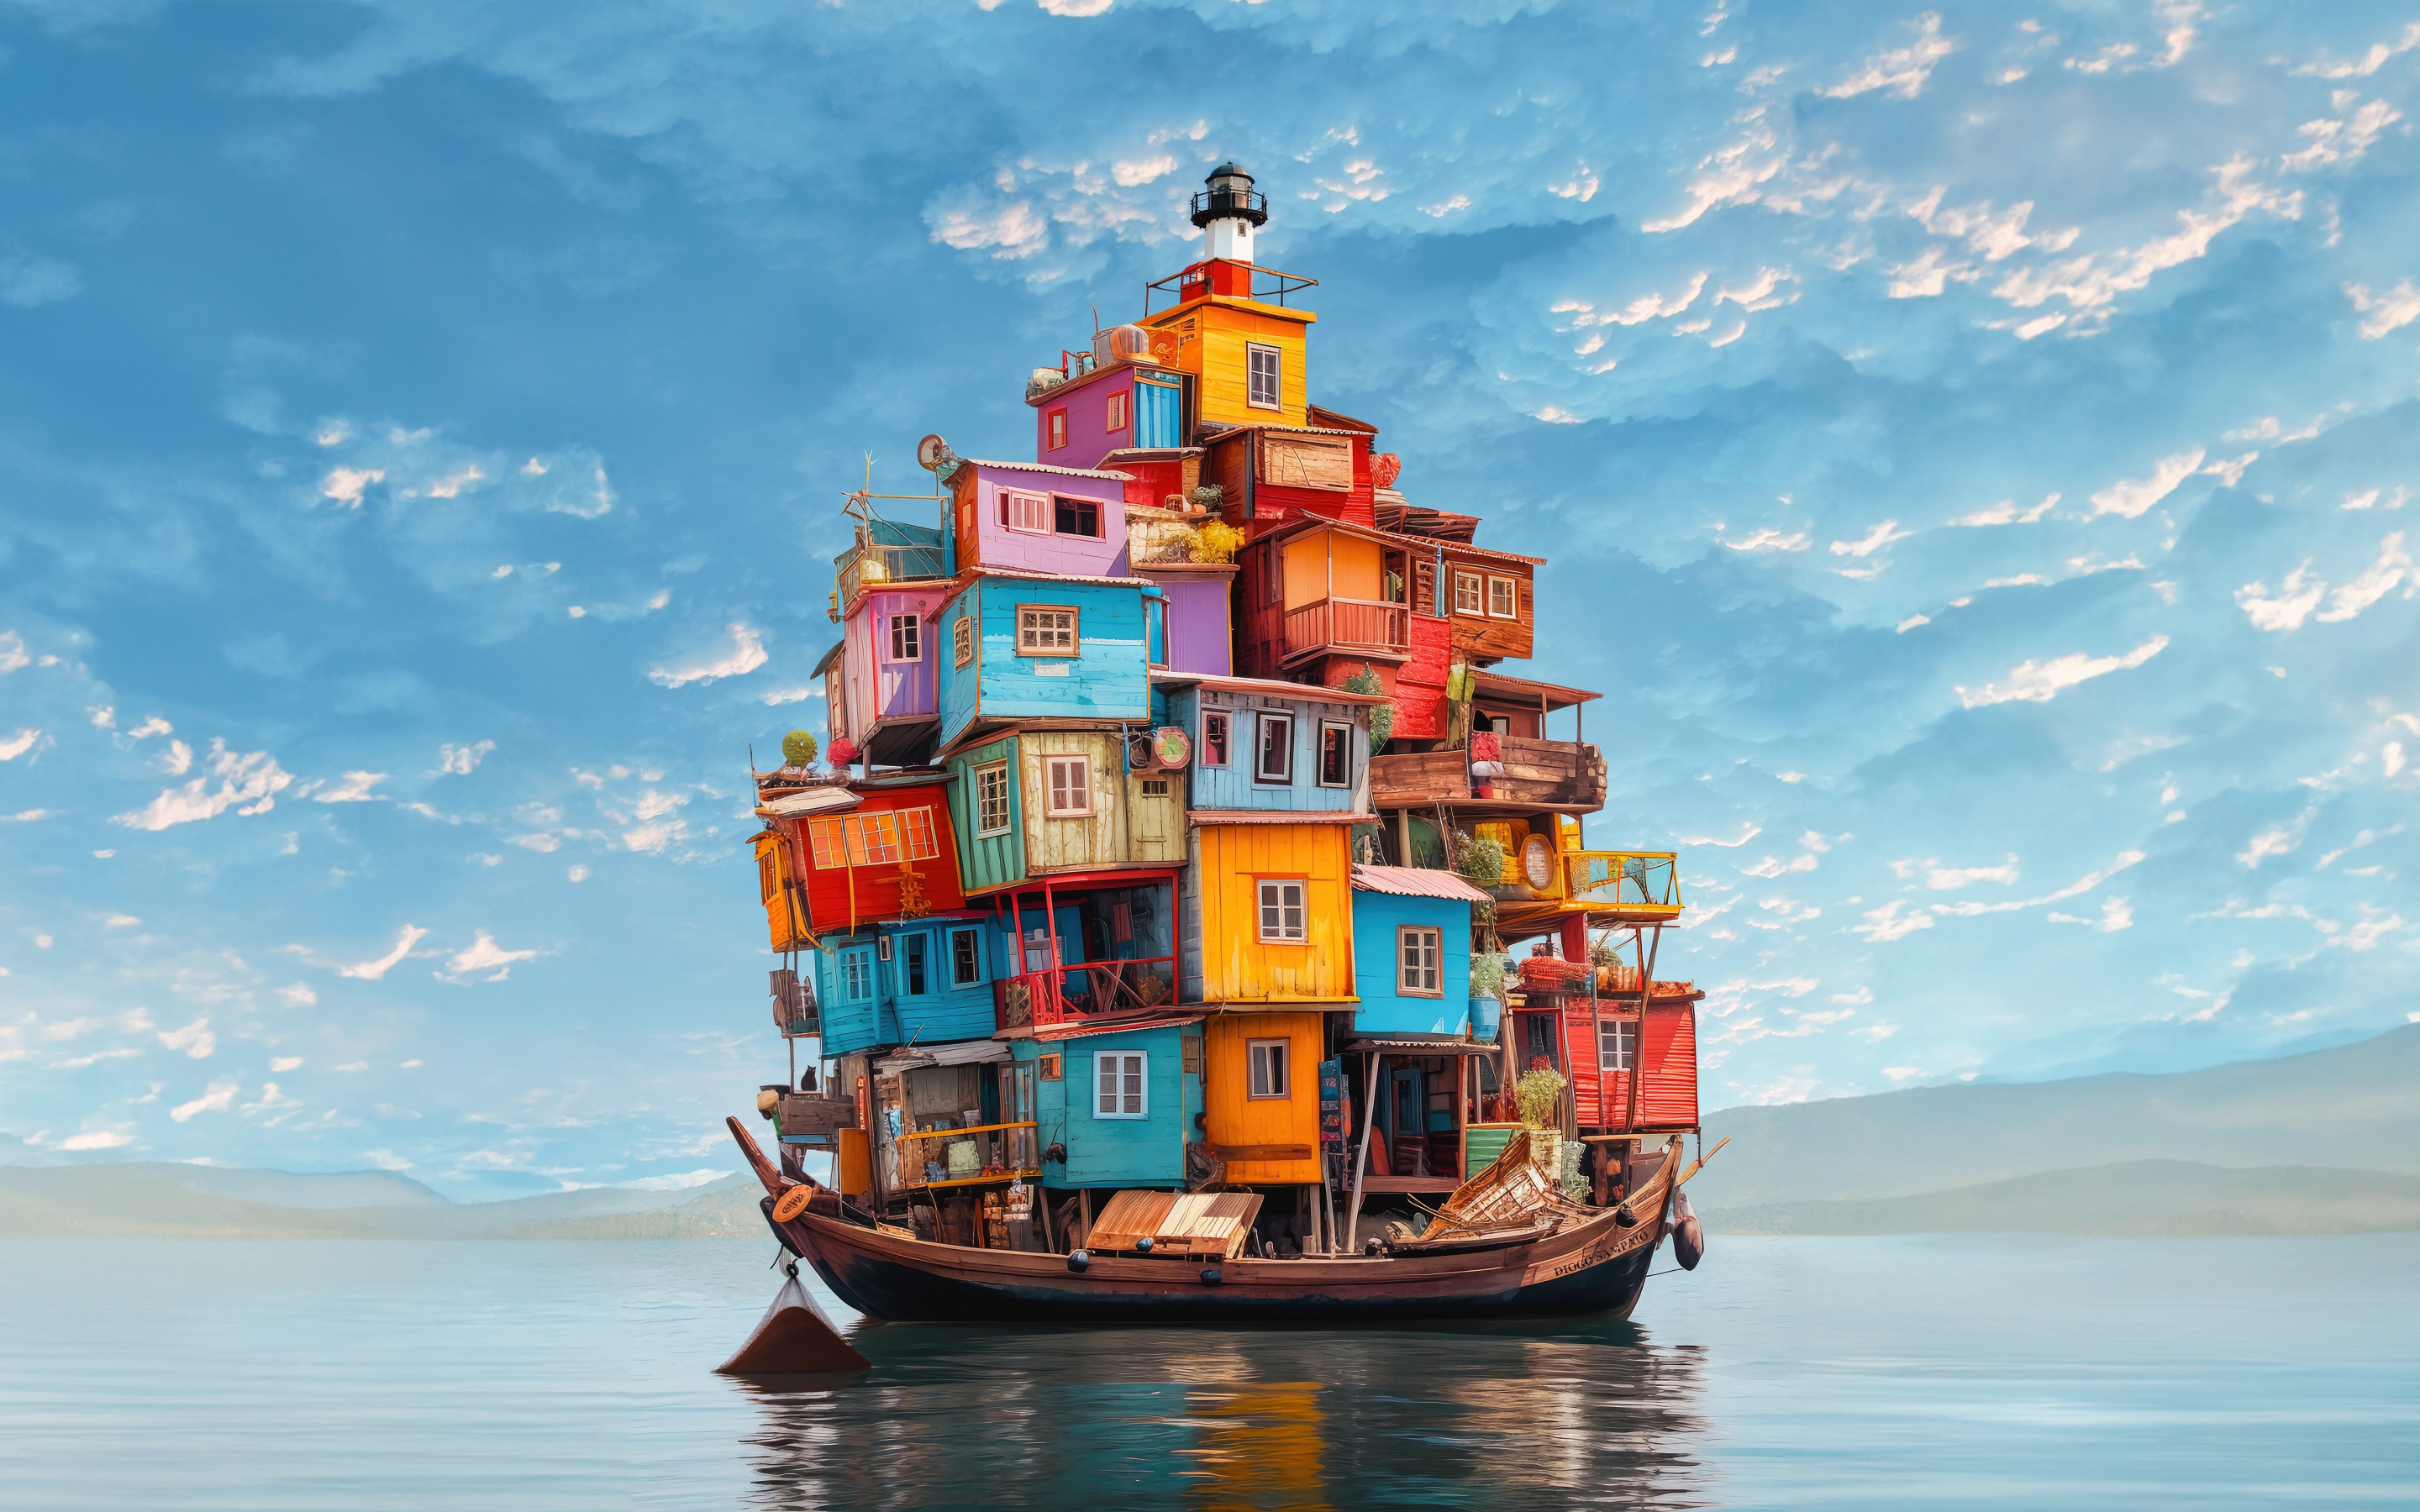 Boat with houses, colorful, art, 2880x1800 wallpaper